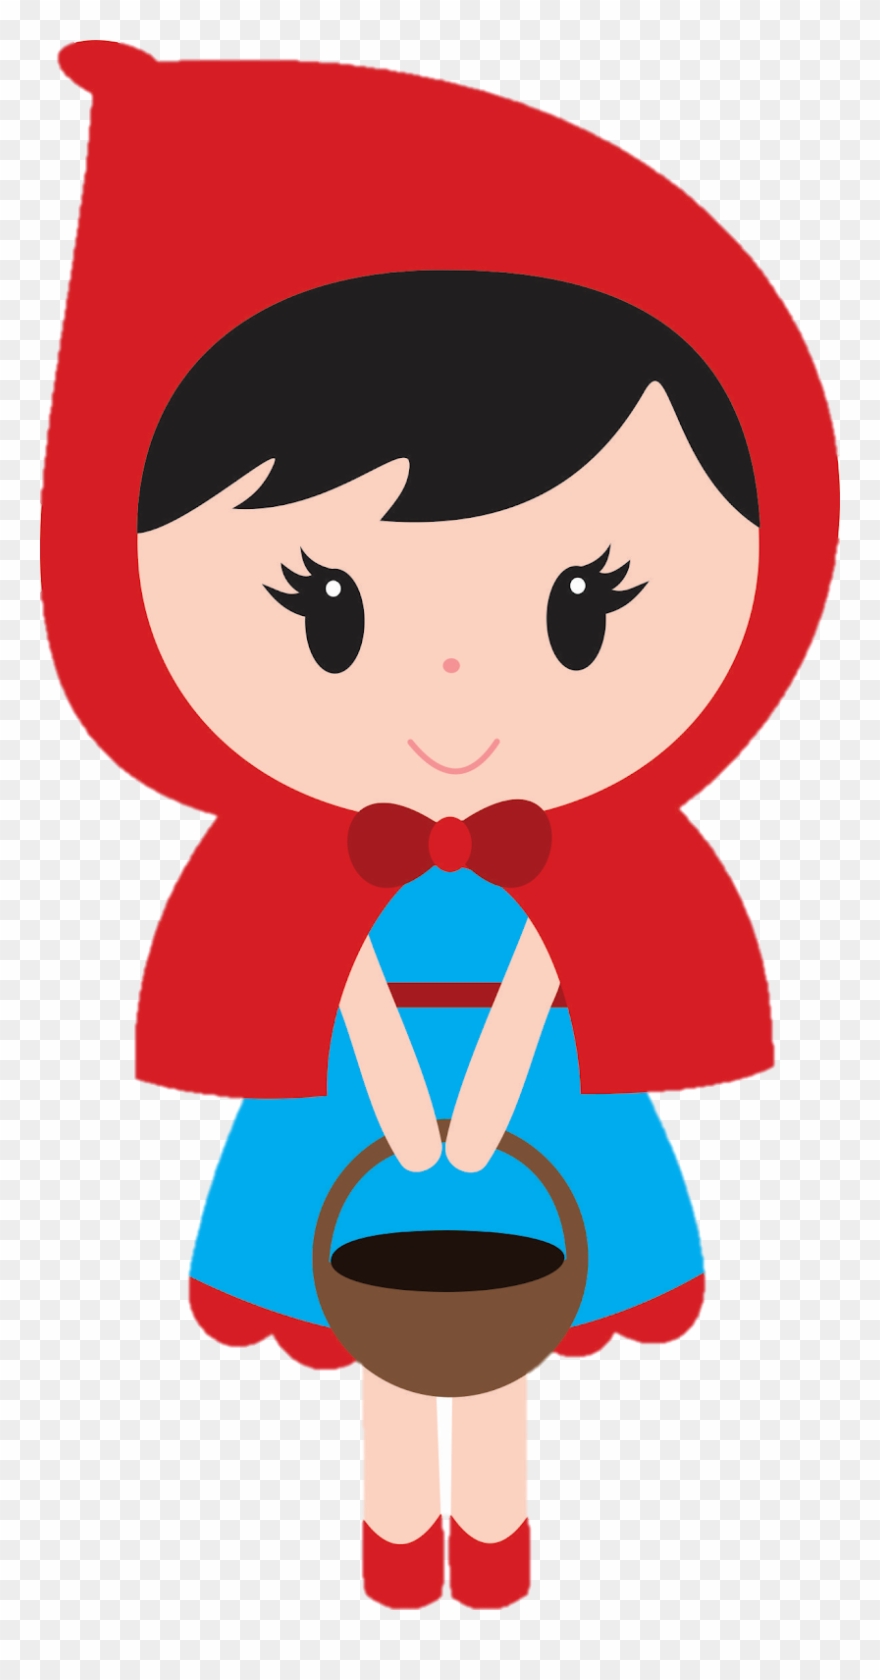 Free Red Riding Hood Clipart, Download Free Red Riding Hood Clipart png ...